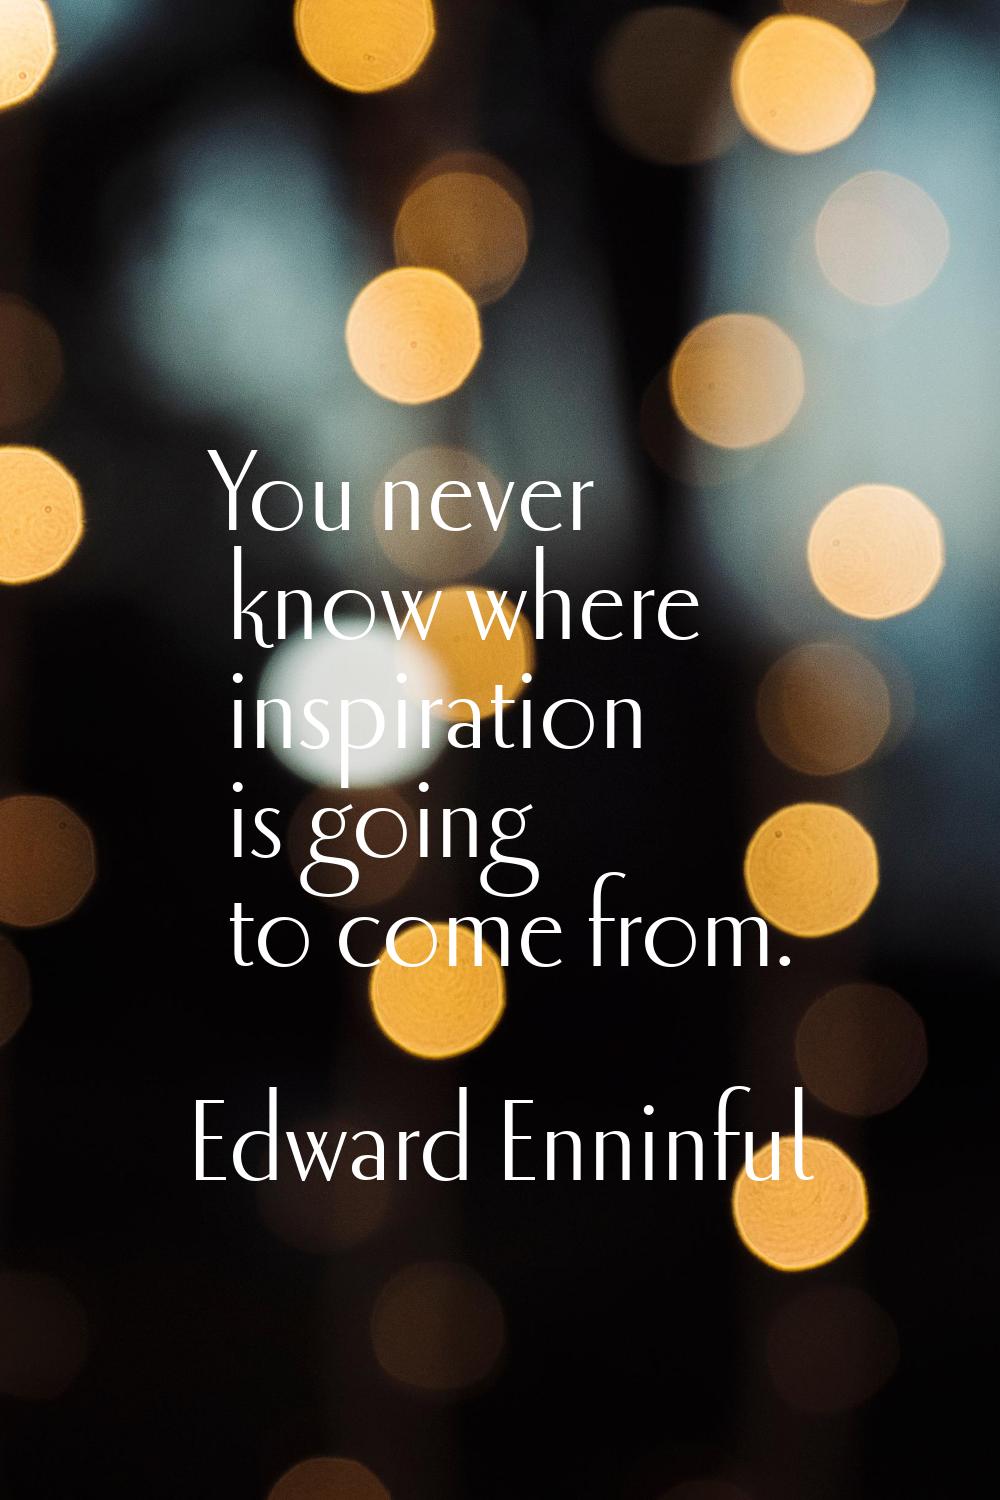 You never know where inspiration is going to come from.